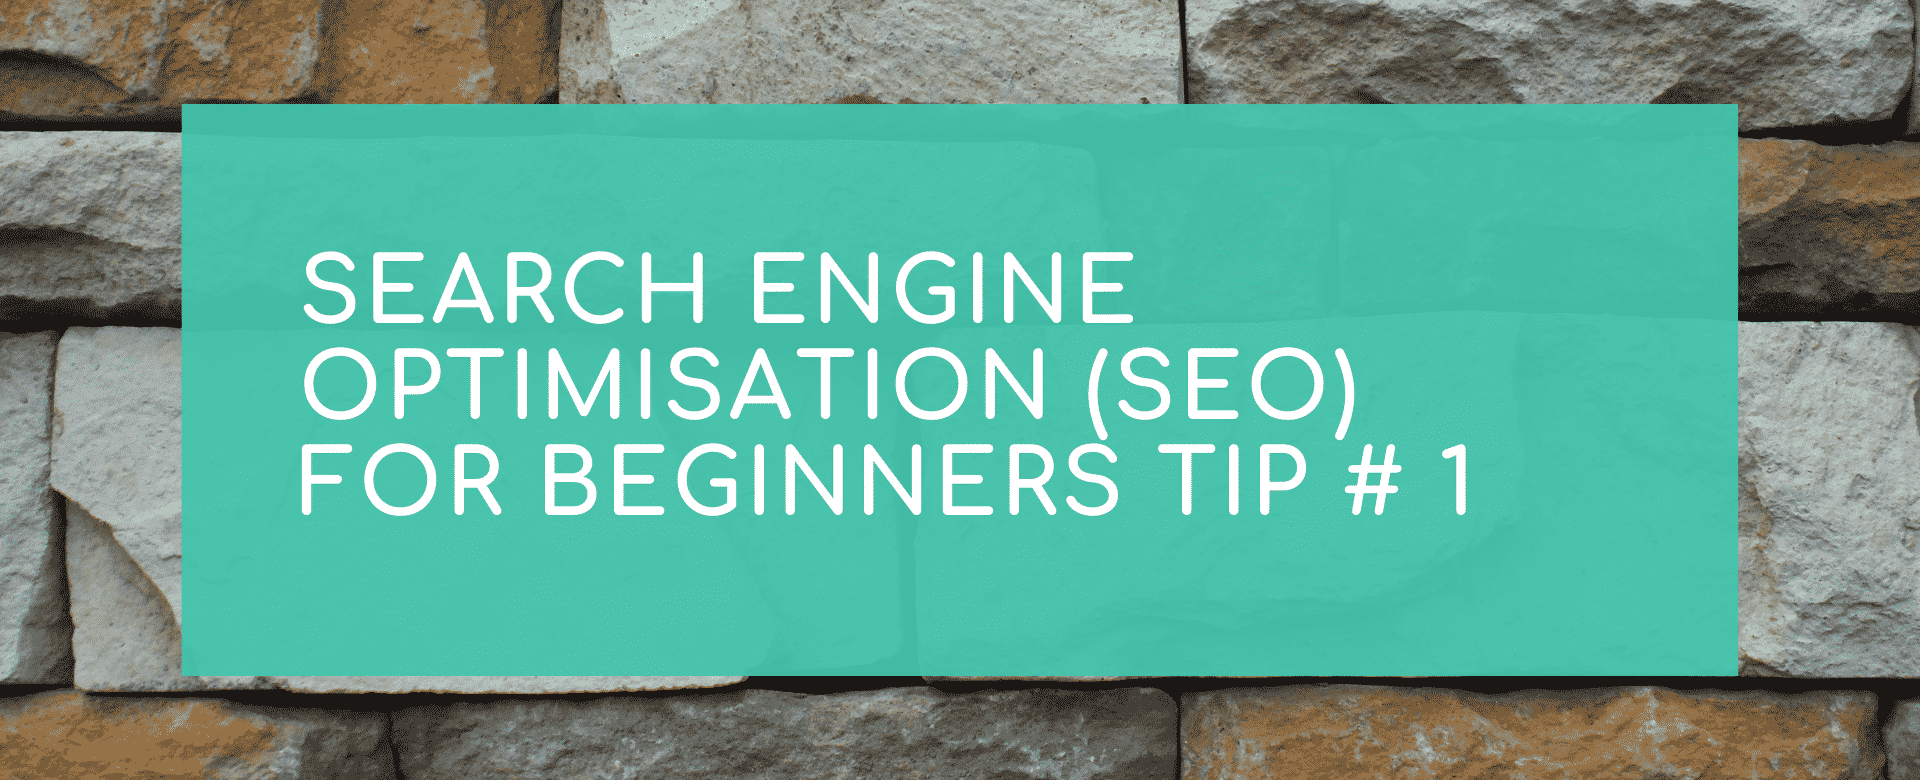 Search Engine Optimisation (SEO) for Beginners Tip # 1